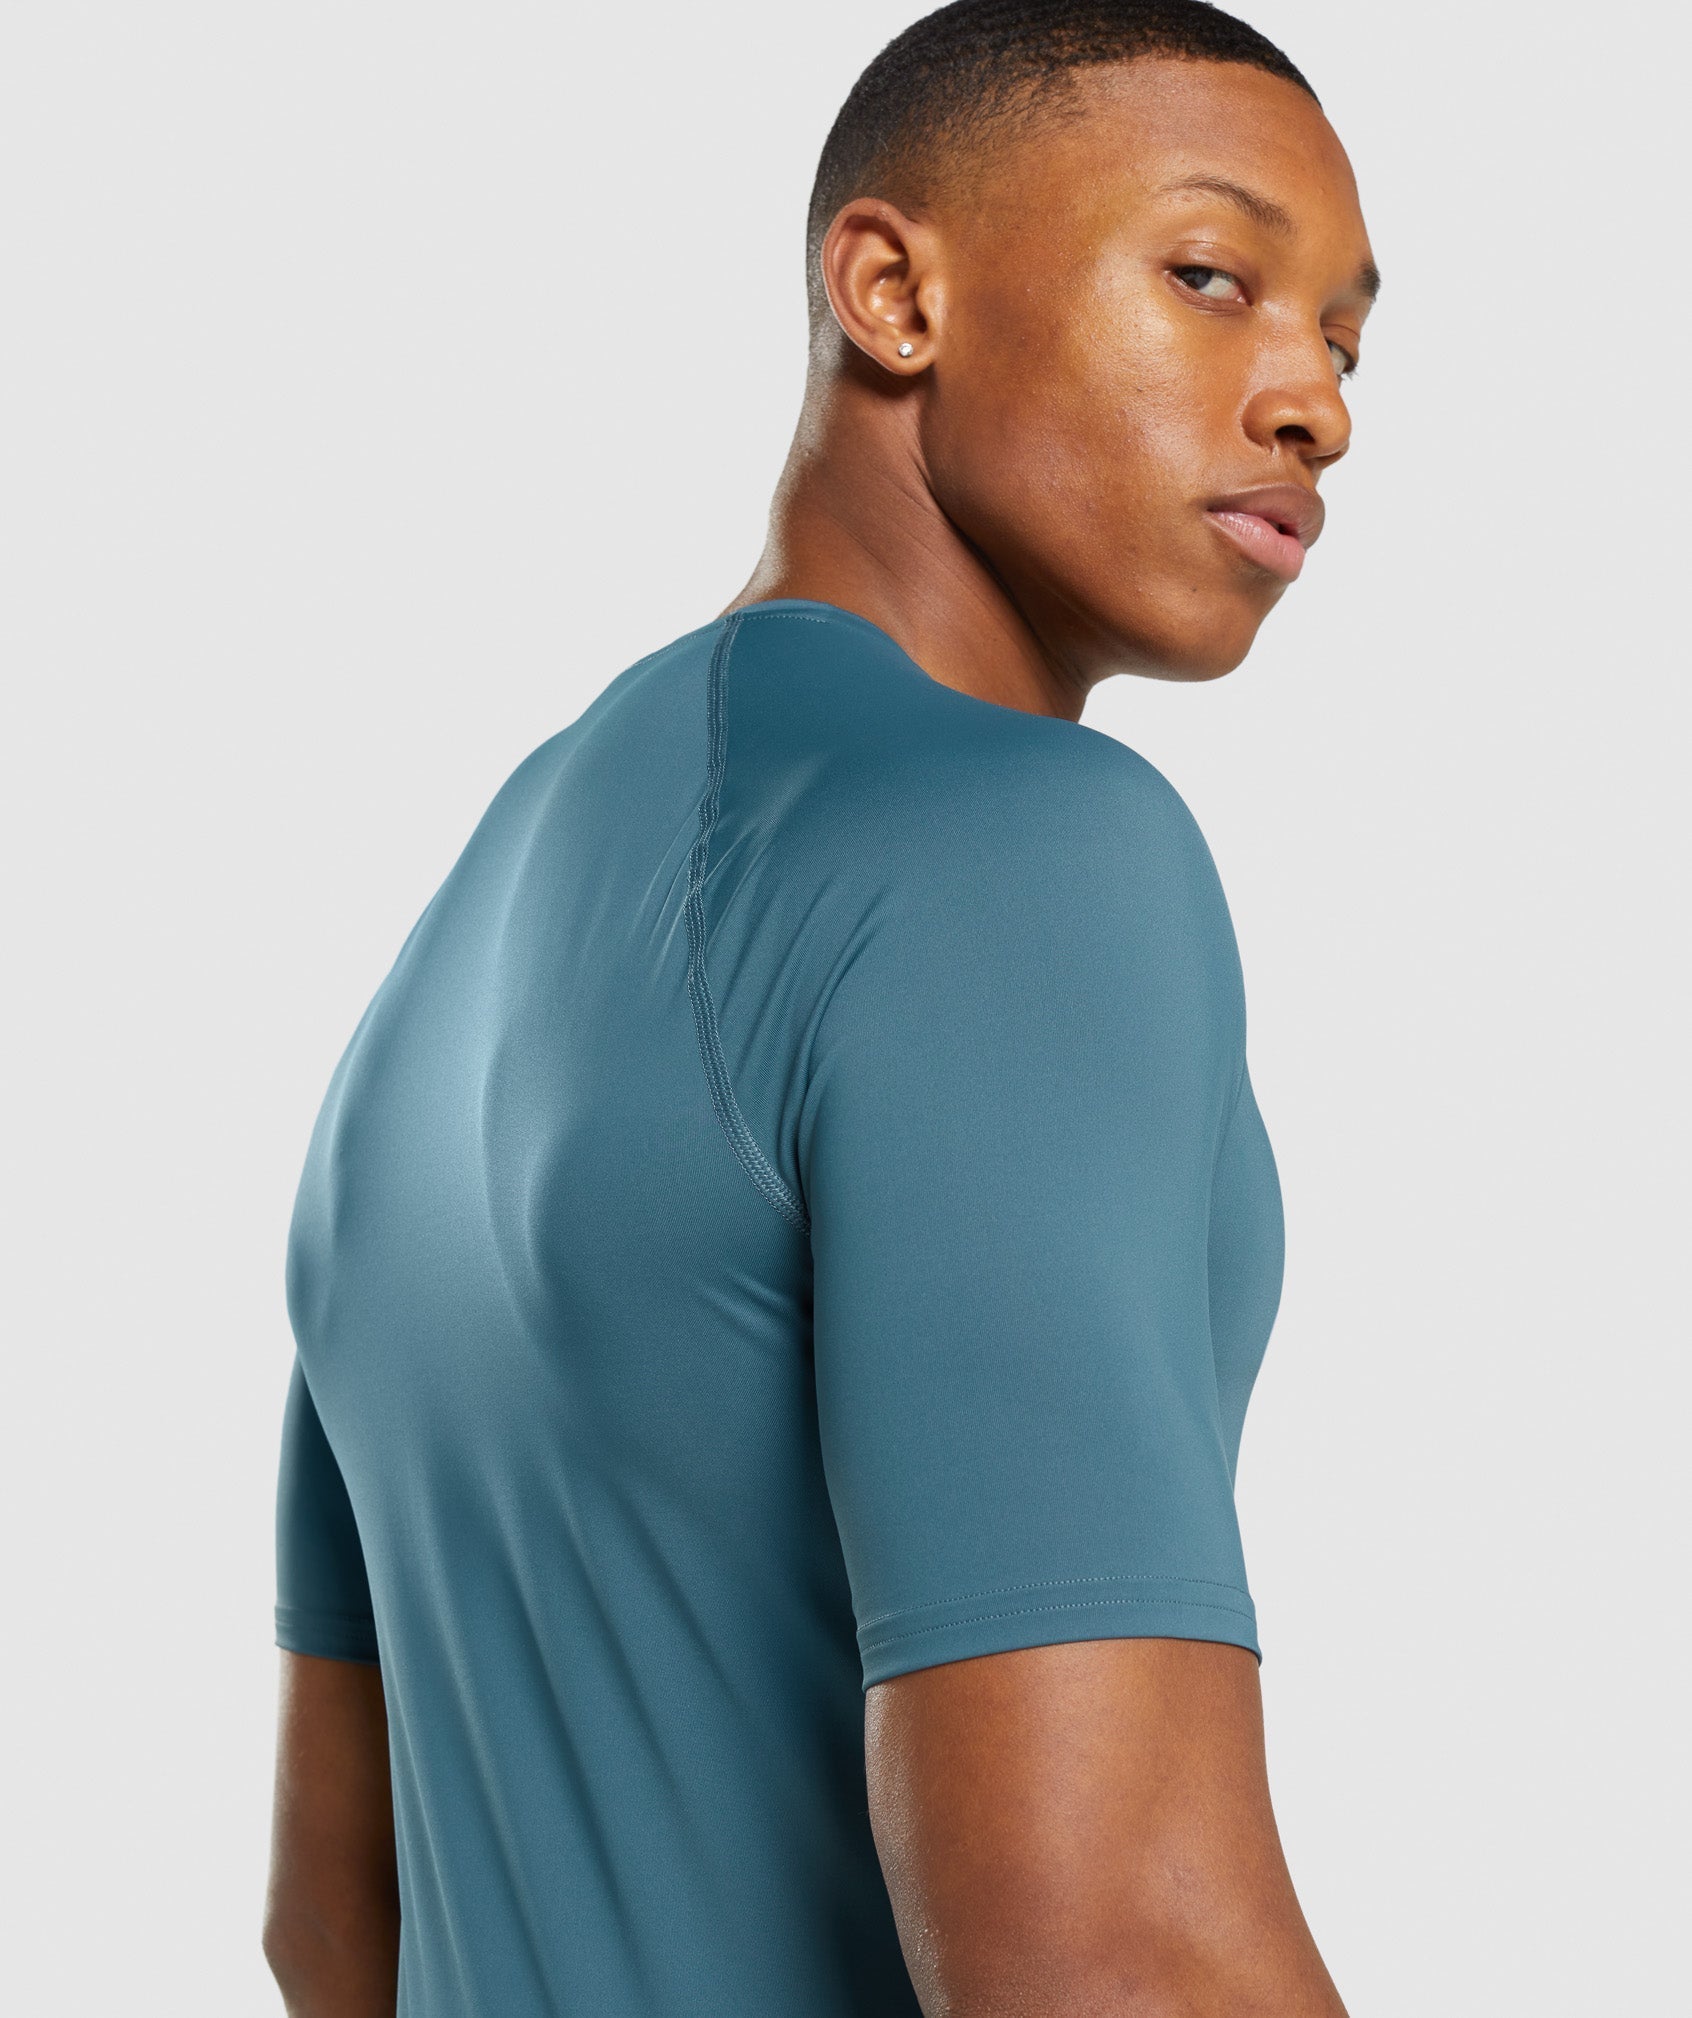 Element Baselayer T-Shirt in Tuscan Teal - view 5